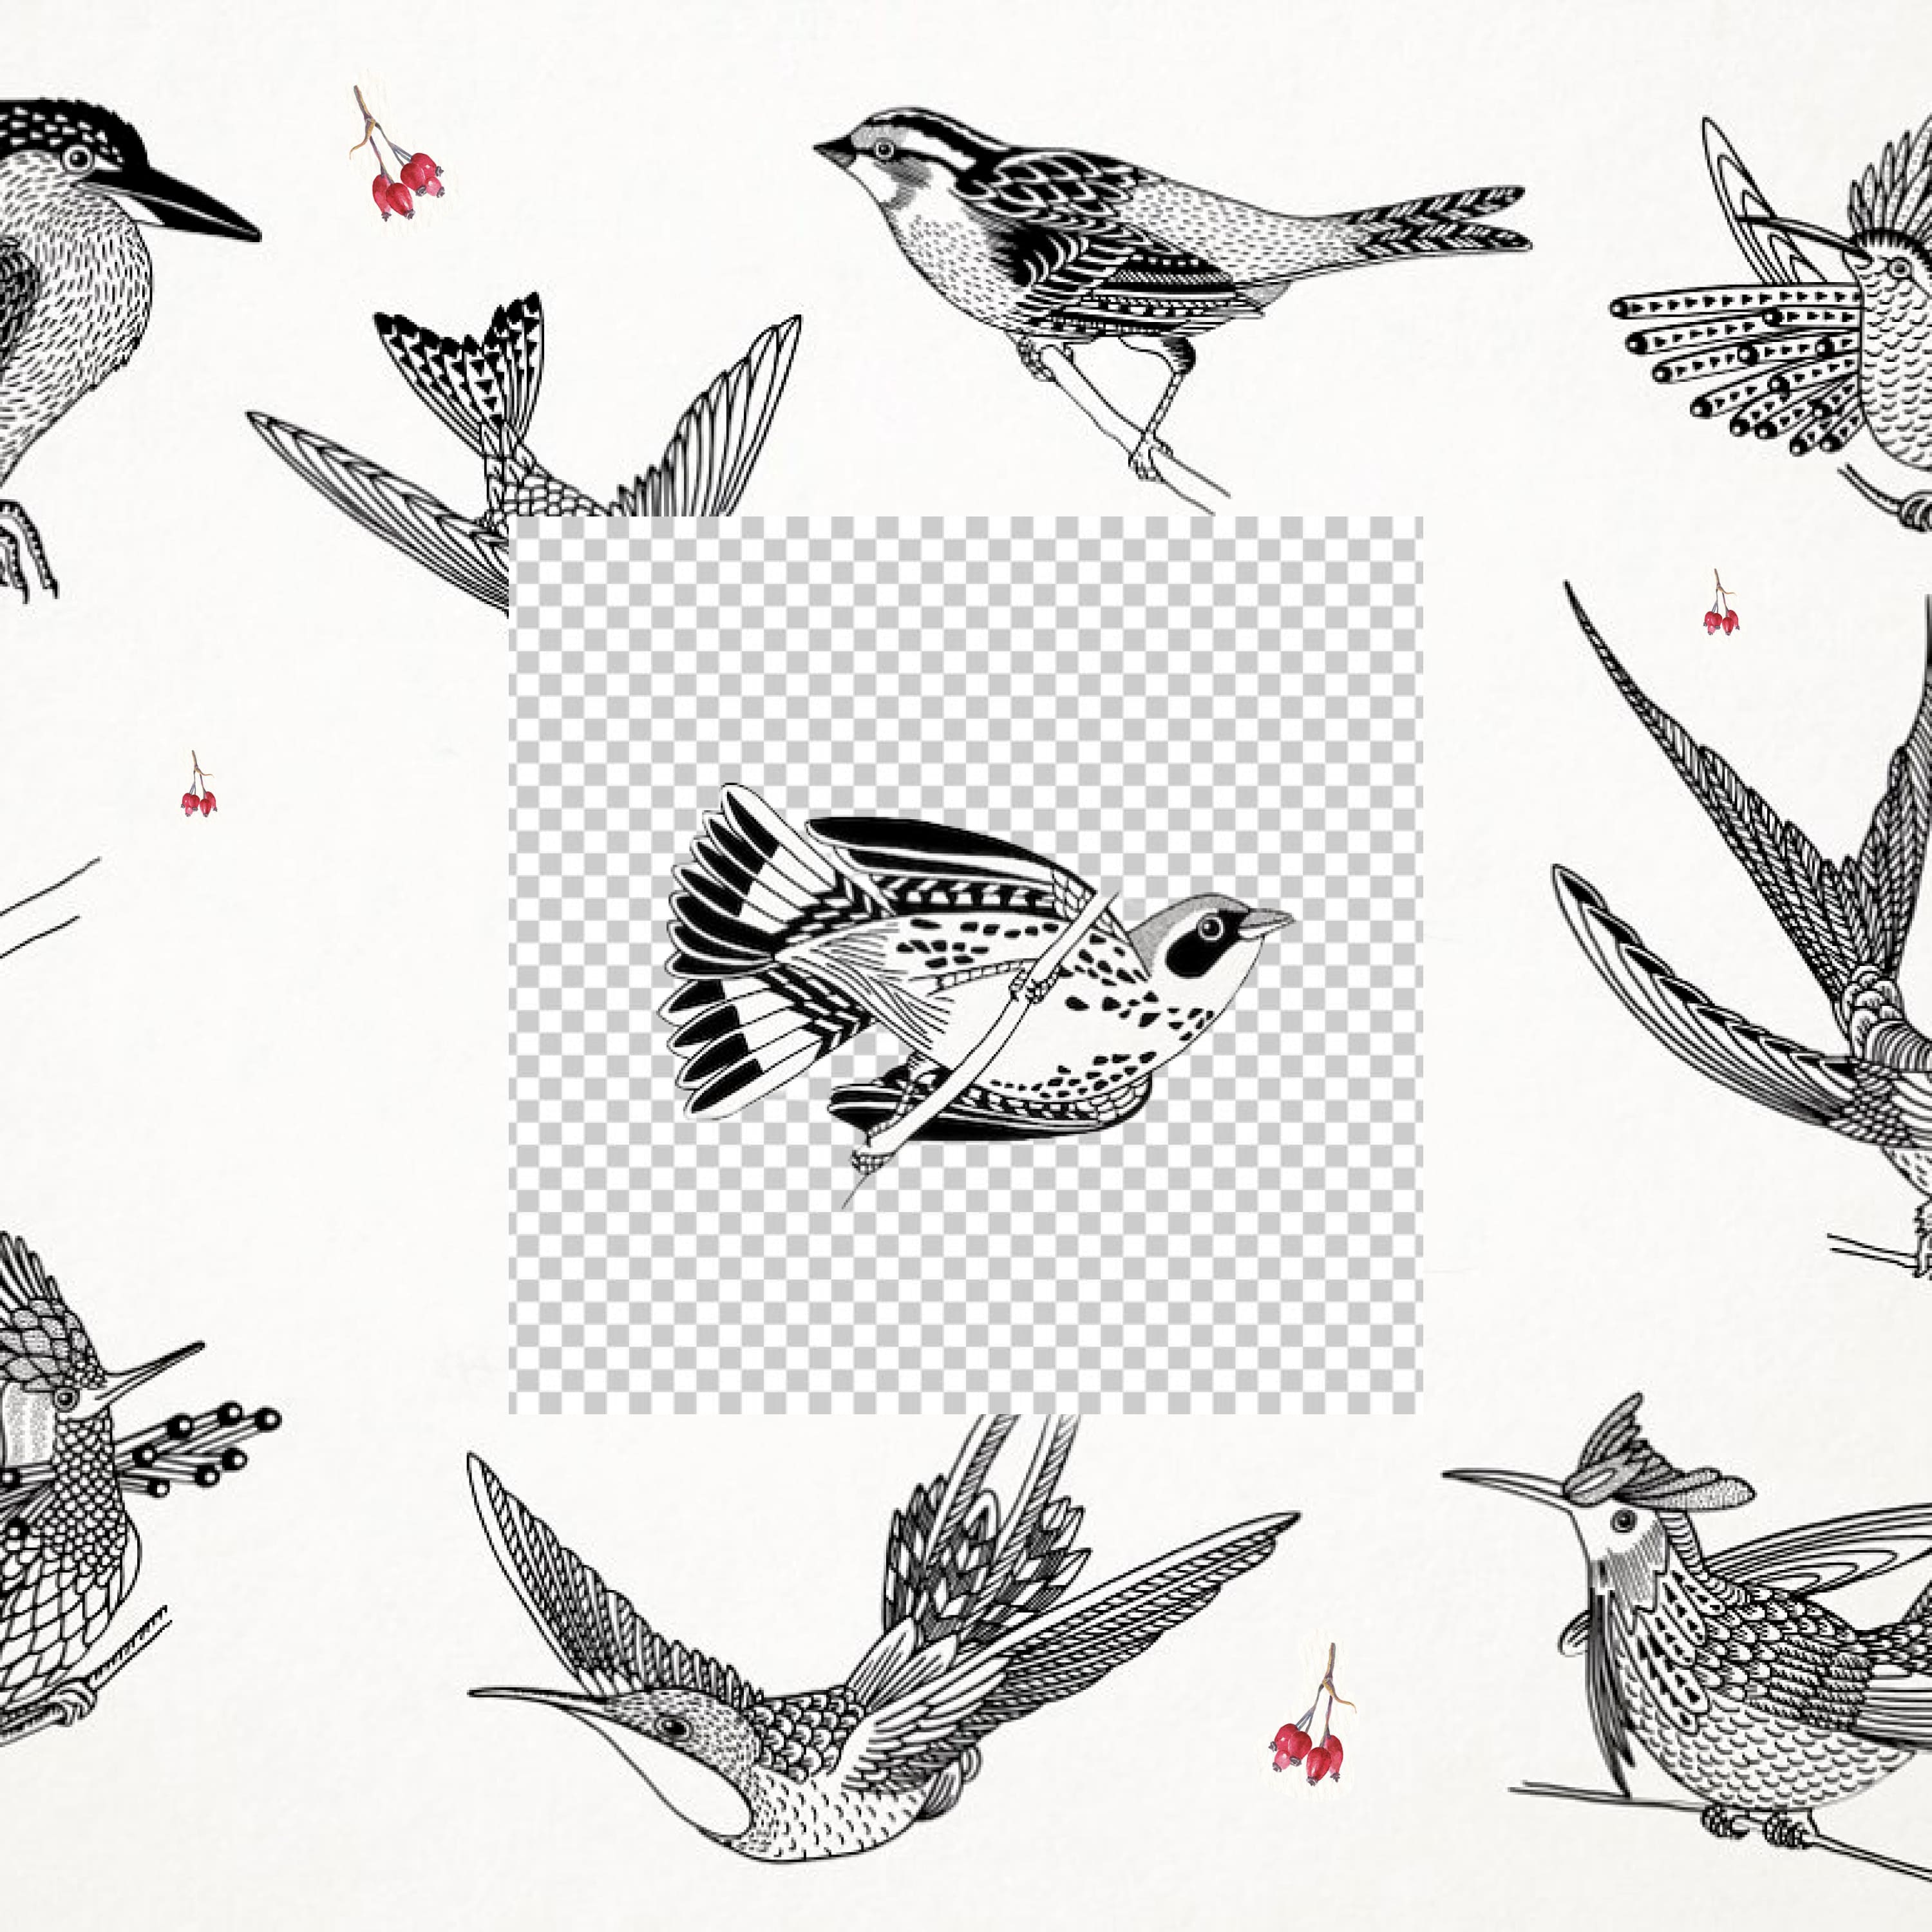 This set contains 14 hand drawn ink illustrations of various birds.